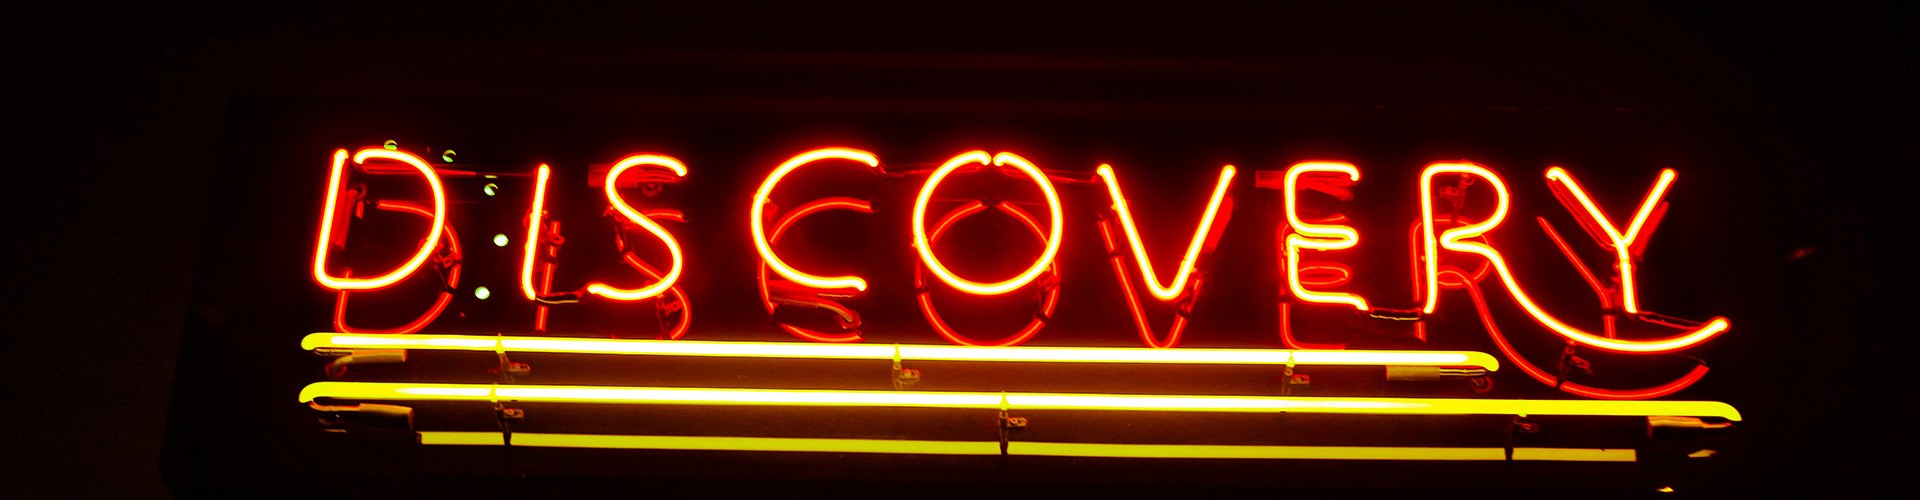 discovery neon sign